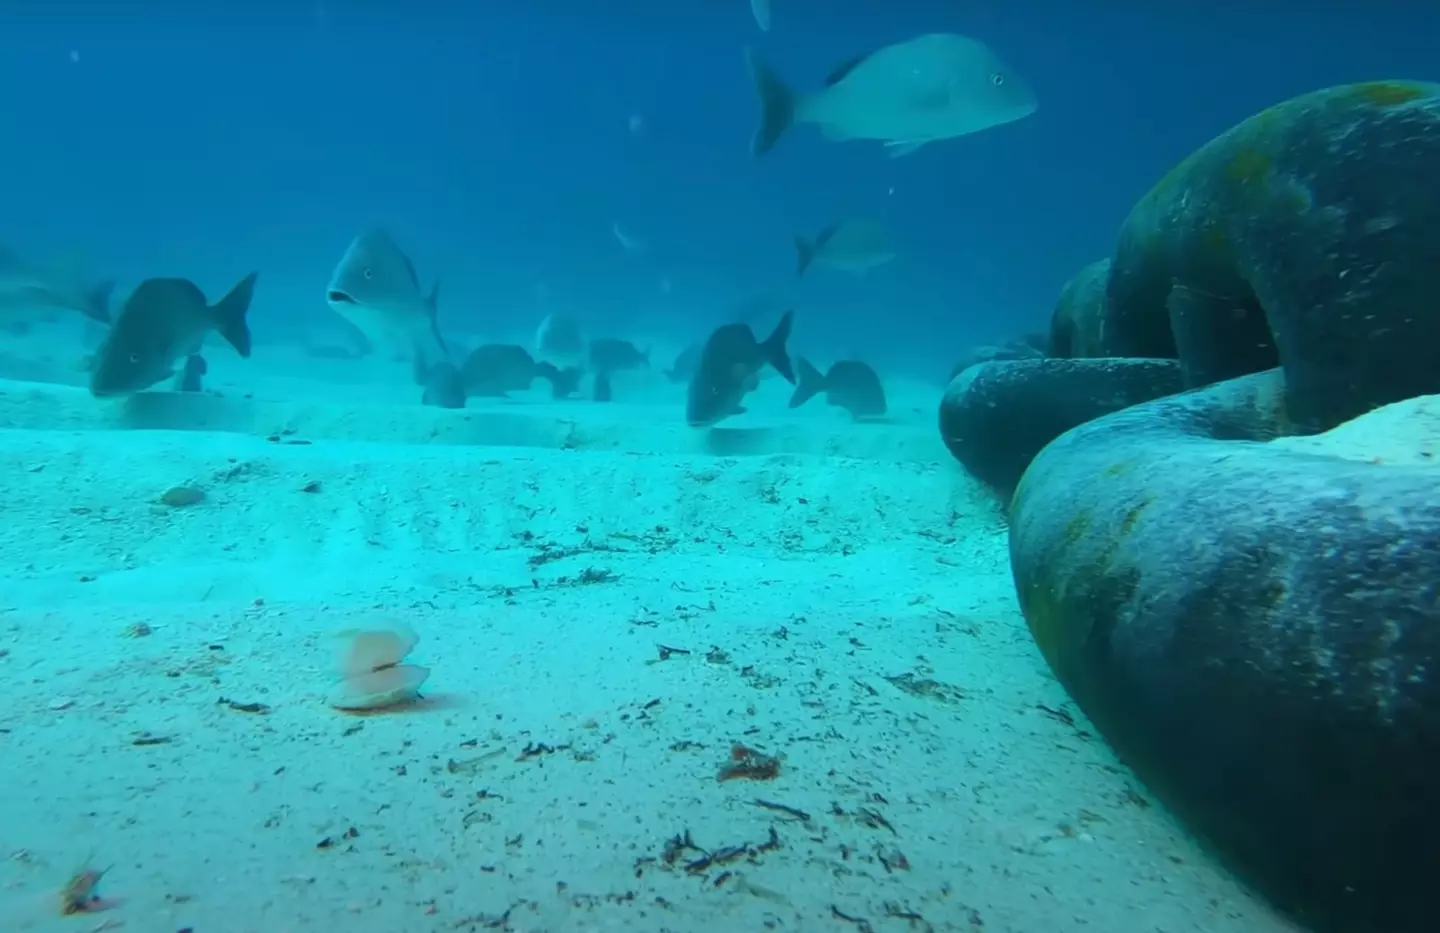 Viewers were initially delighted to see the school of fish seemingly complexed at the GoPro dropping in.